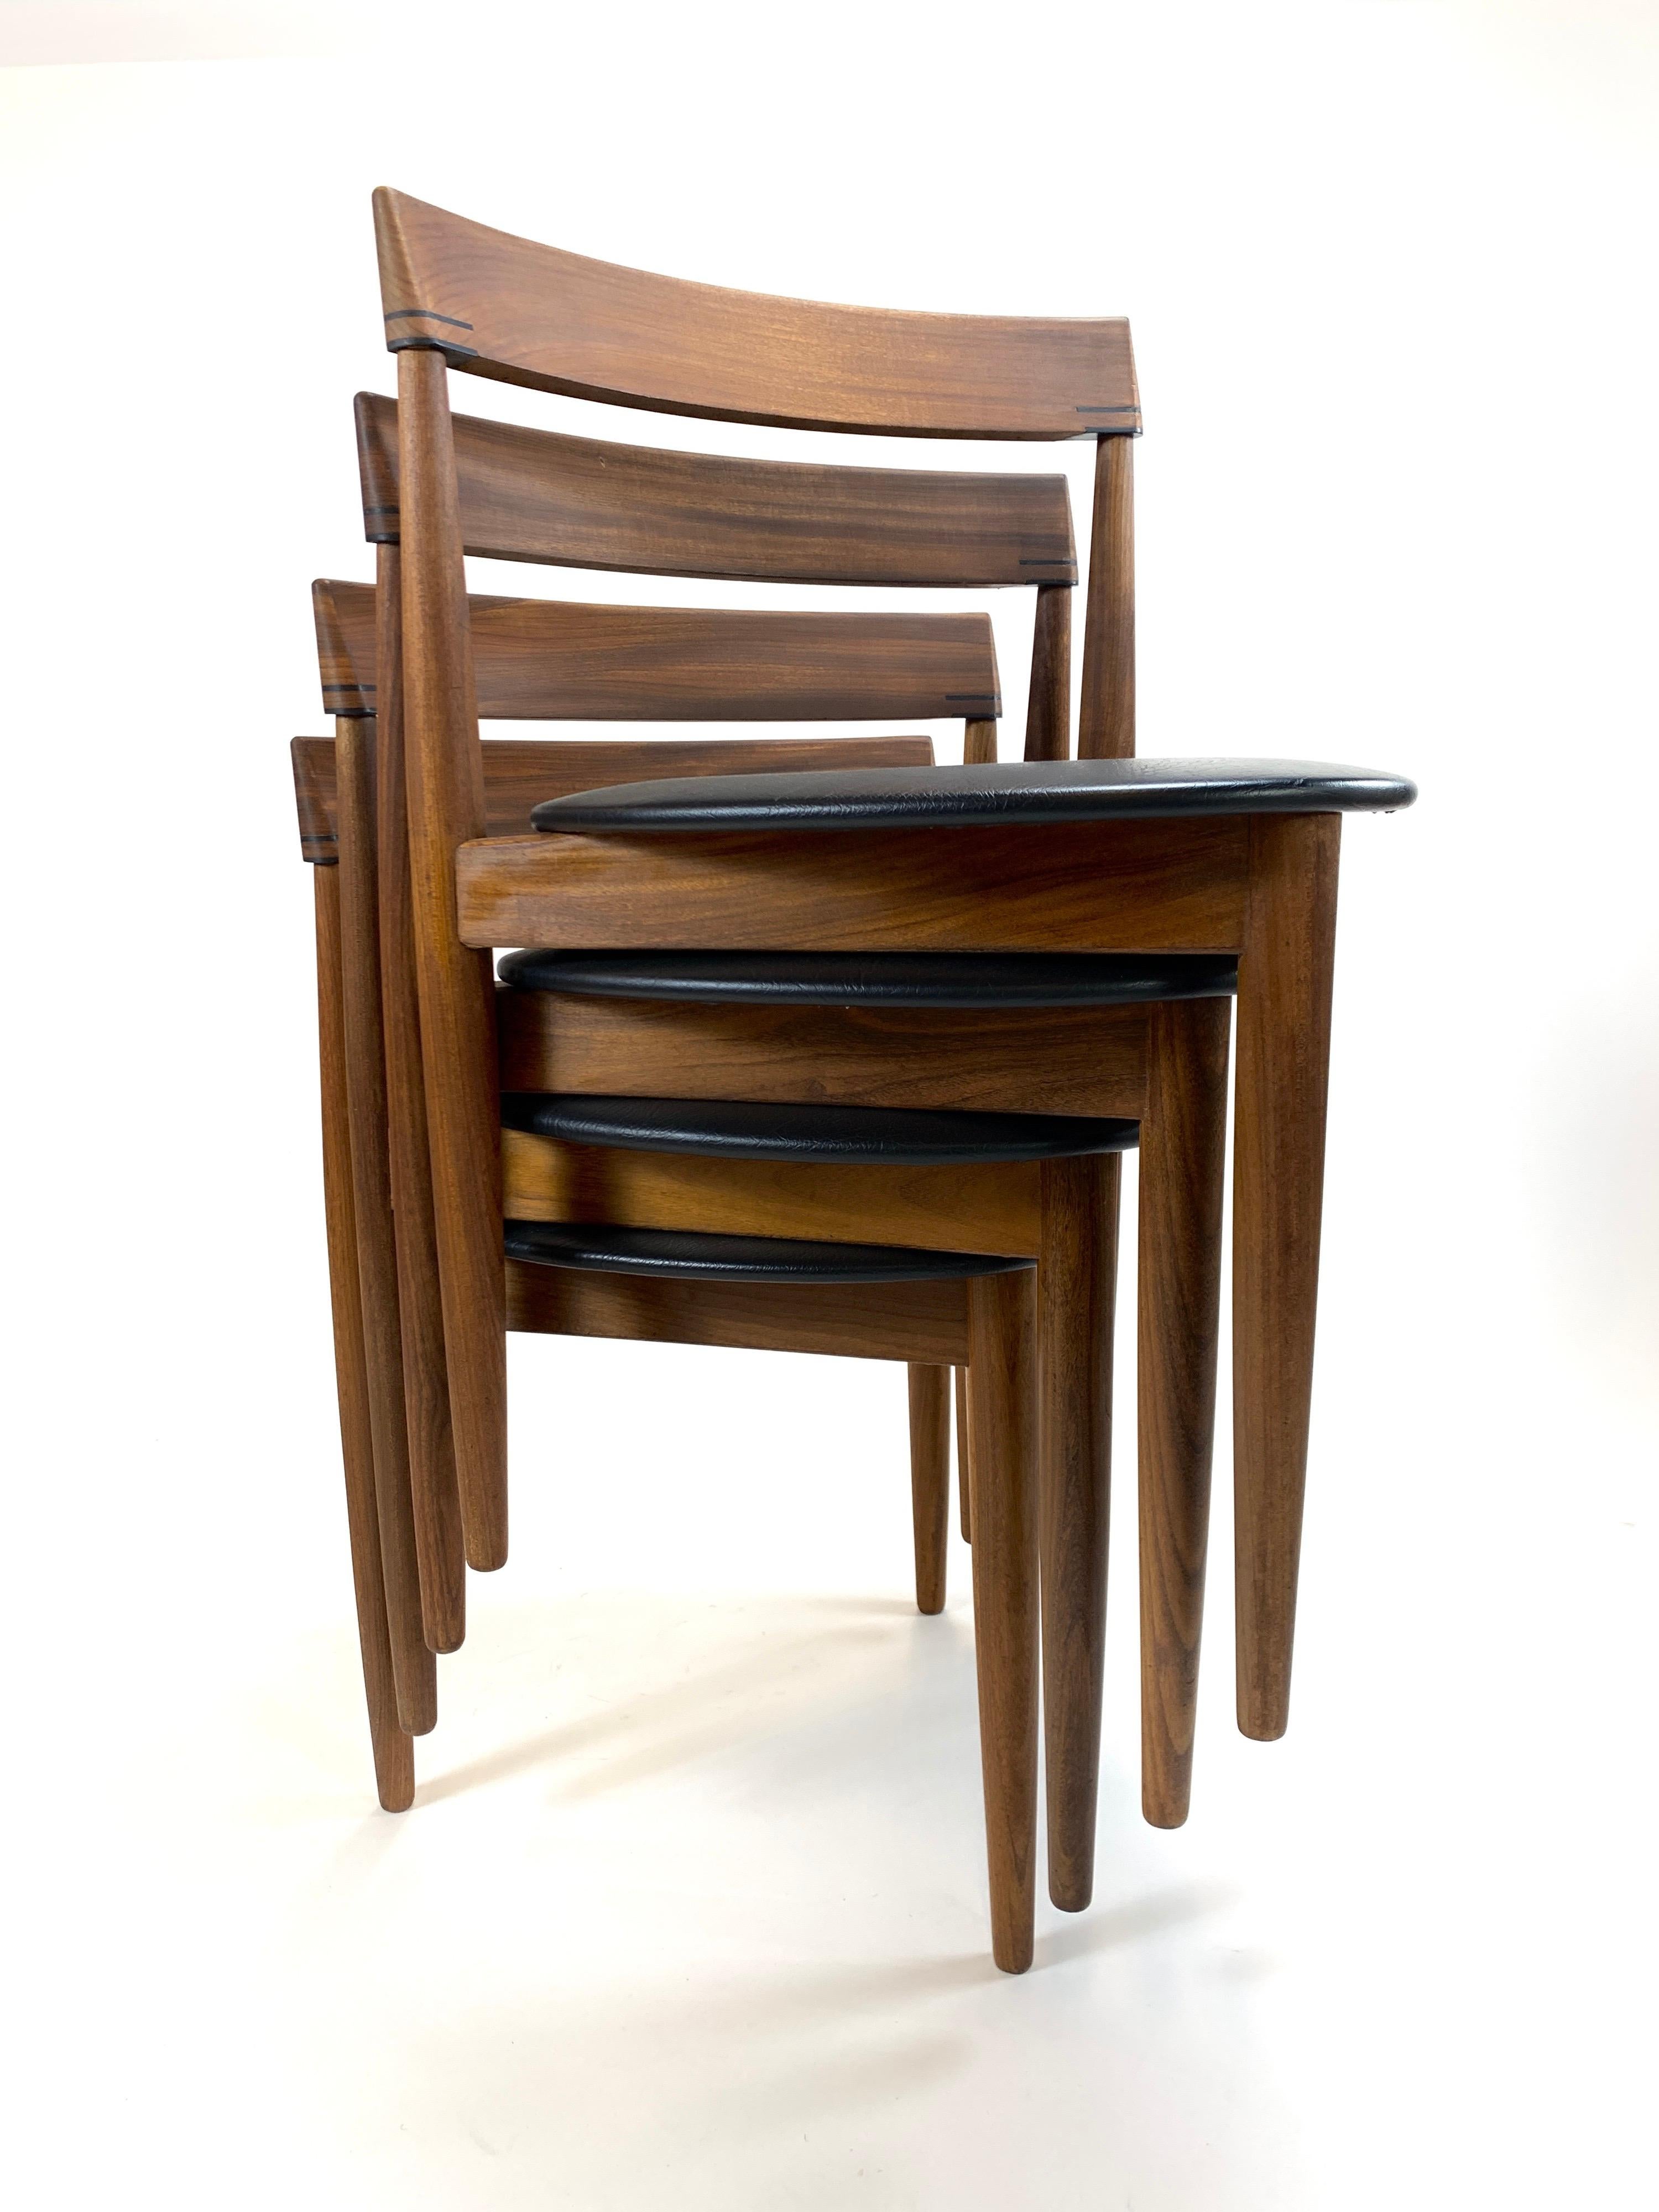 Designed and made in Denmark, these are a spectacular example of Mid-Century Modern, Danish design. Comfortable and stylish. Three tapered walnut legs leading to a triangular seat. Accented by linear joinery on the curved back, these are guaranteed